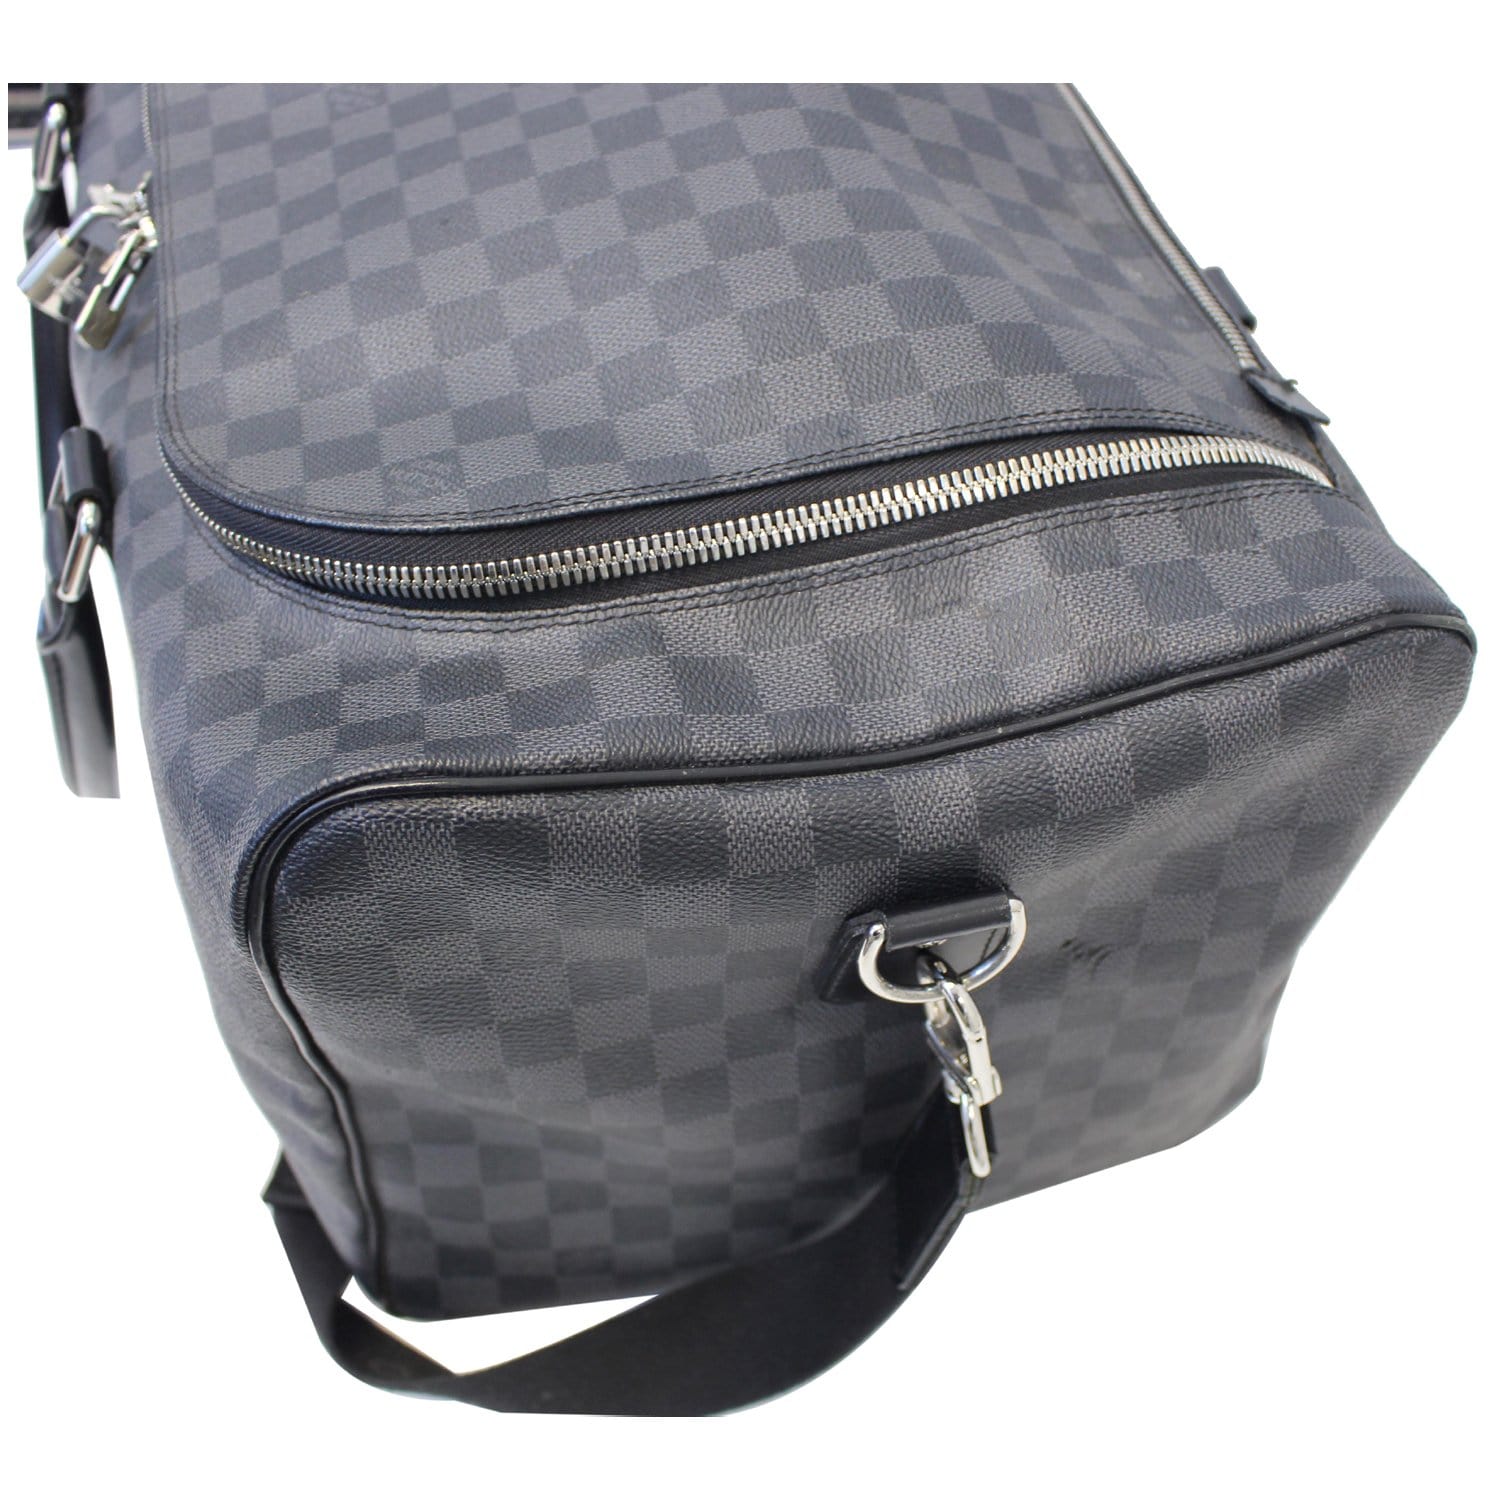 Louis Vuitton Roadster Duffle Bag Damier Graphite Black Weekend Travel  Carry On